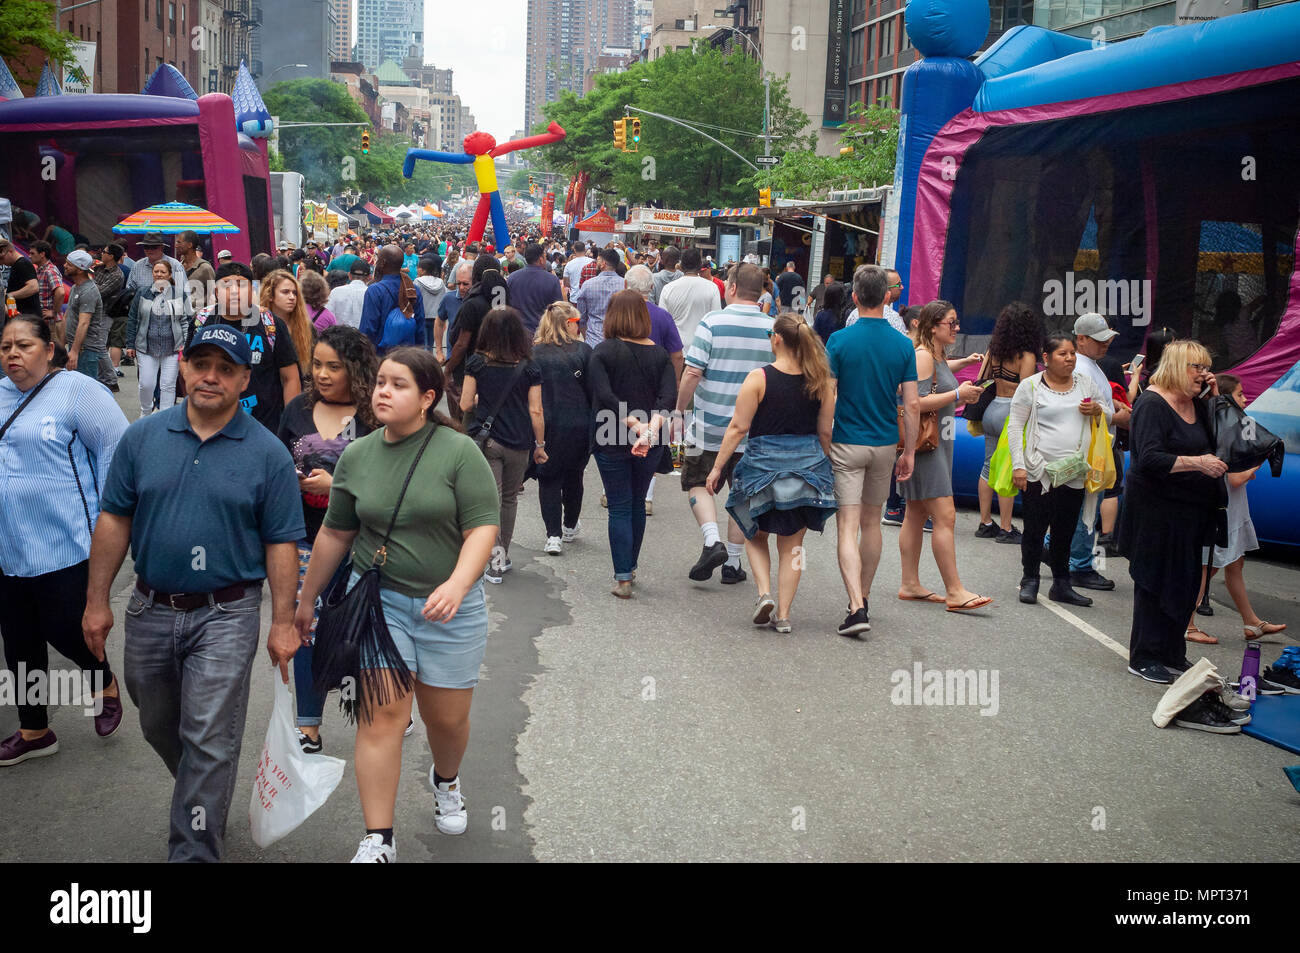 Crowds gorge themselves at the 45th Annual Ninth Avenue International Food Festival in New York on Sunday, May 20, 2018. (© Richard B. Levine) Stock Photo